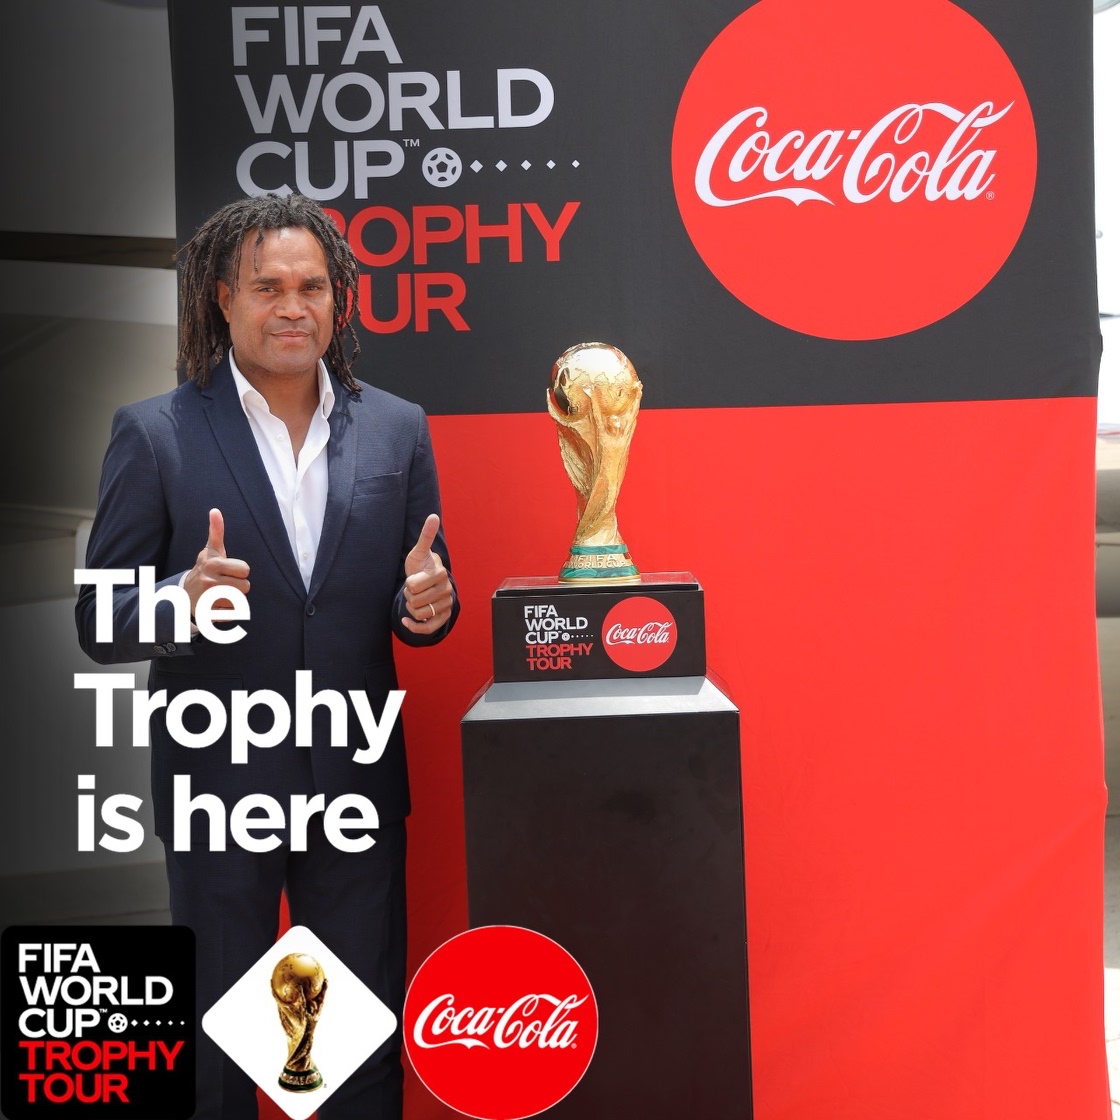 If seeing is believing then watch it with your own eyes! FIFA World Cup Trophy is here! #BelievingIsMagic #FIFAWorldCup2022 #RealMagic #CocaCola